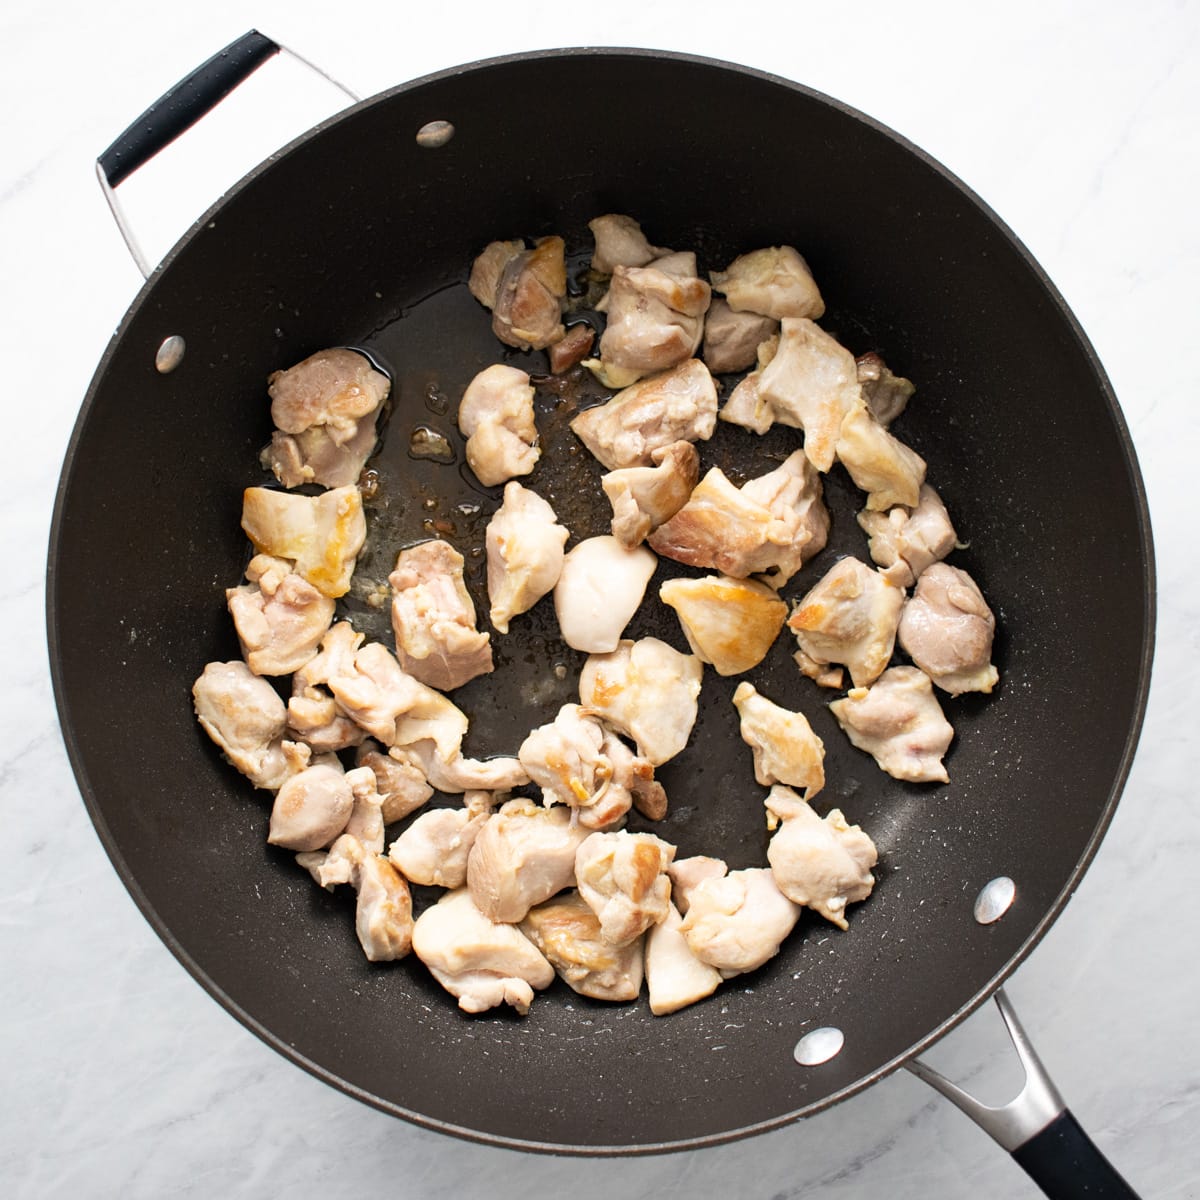 Browning chicken thigh pieces in a large skillet.